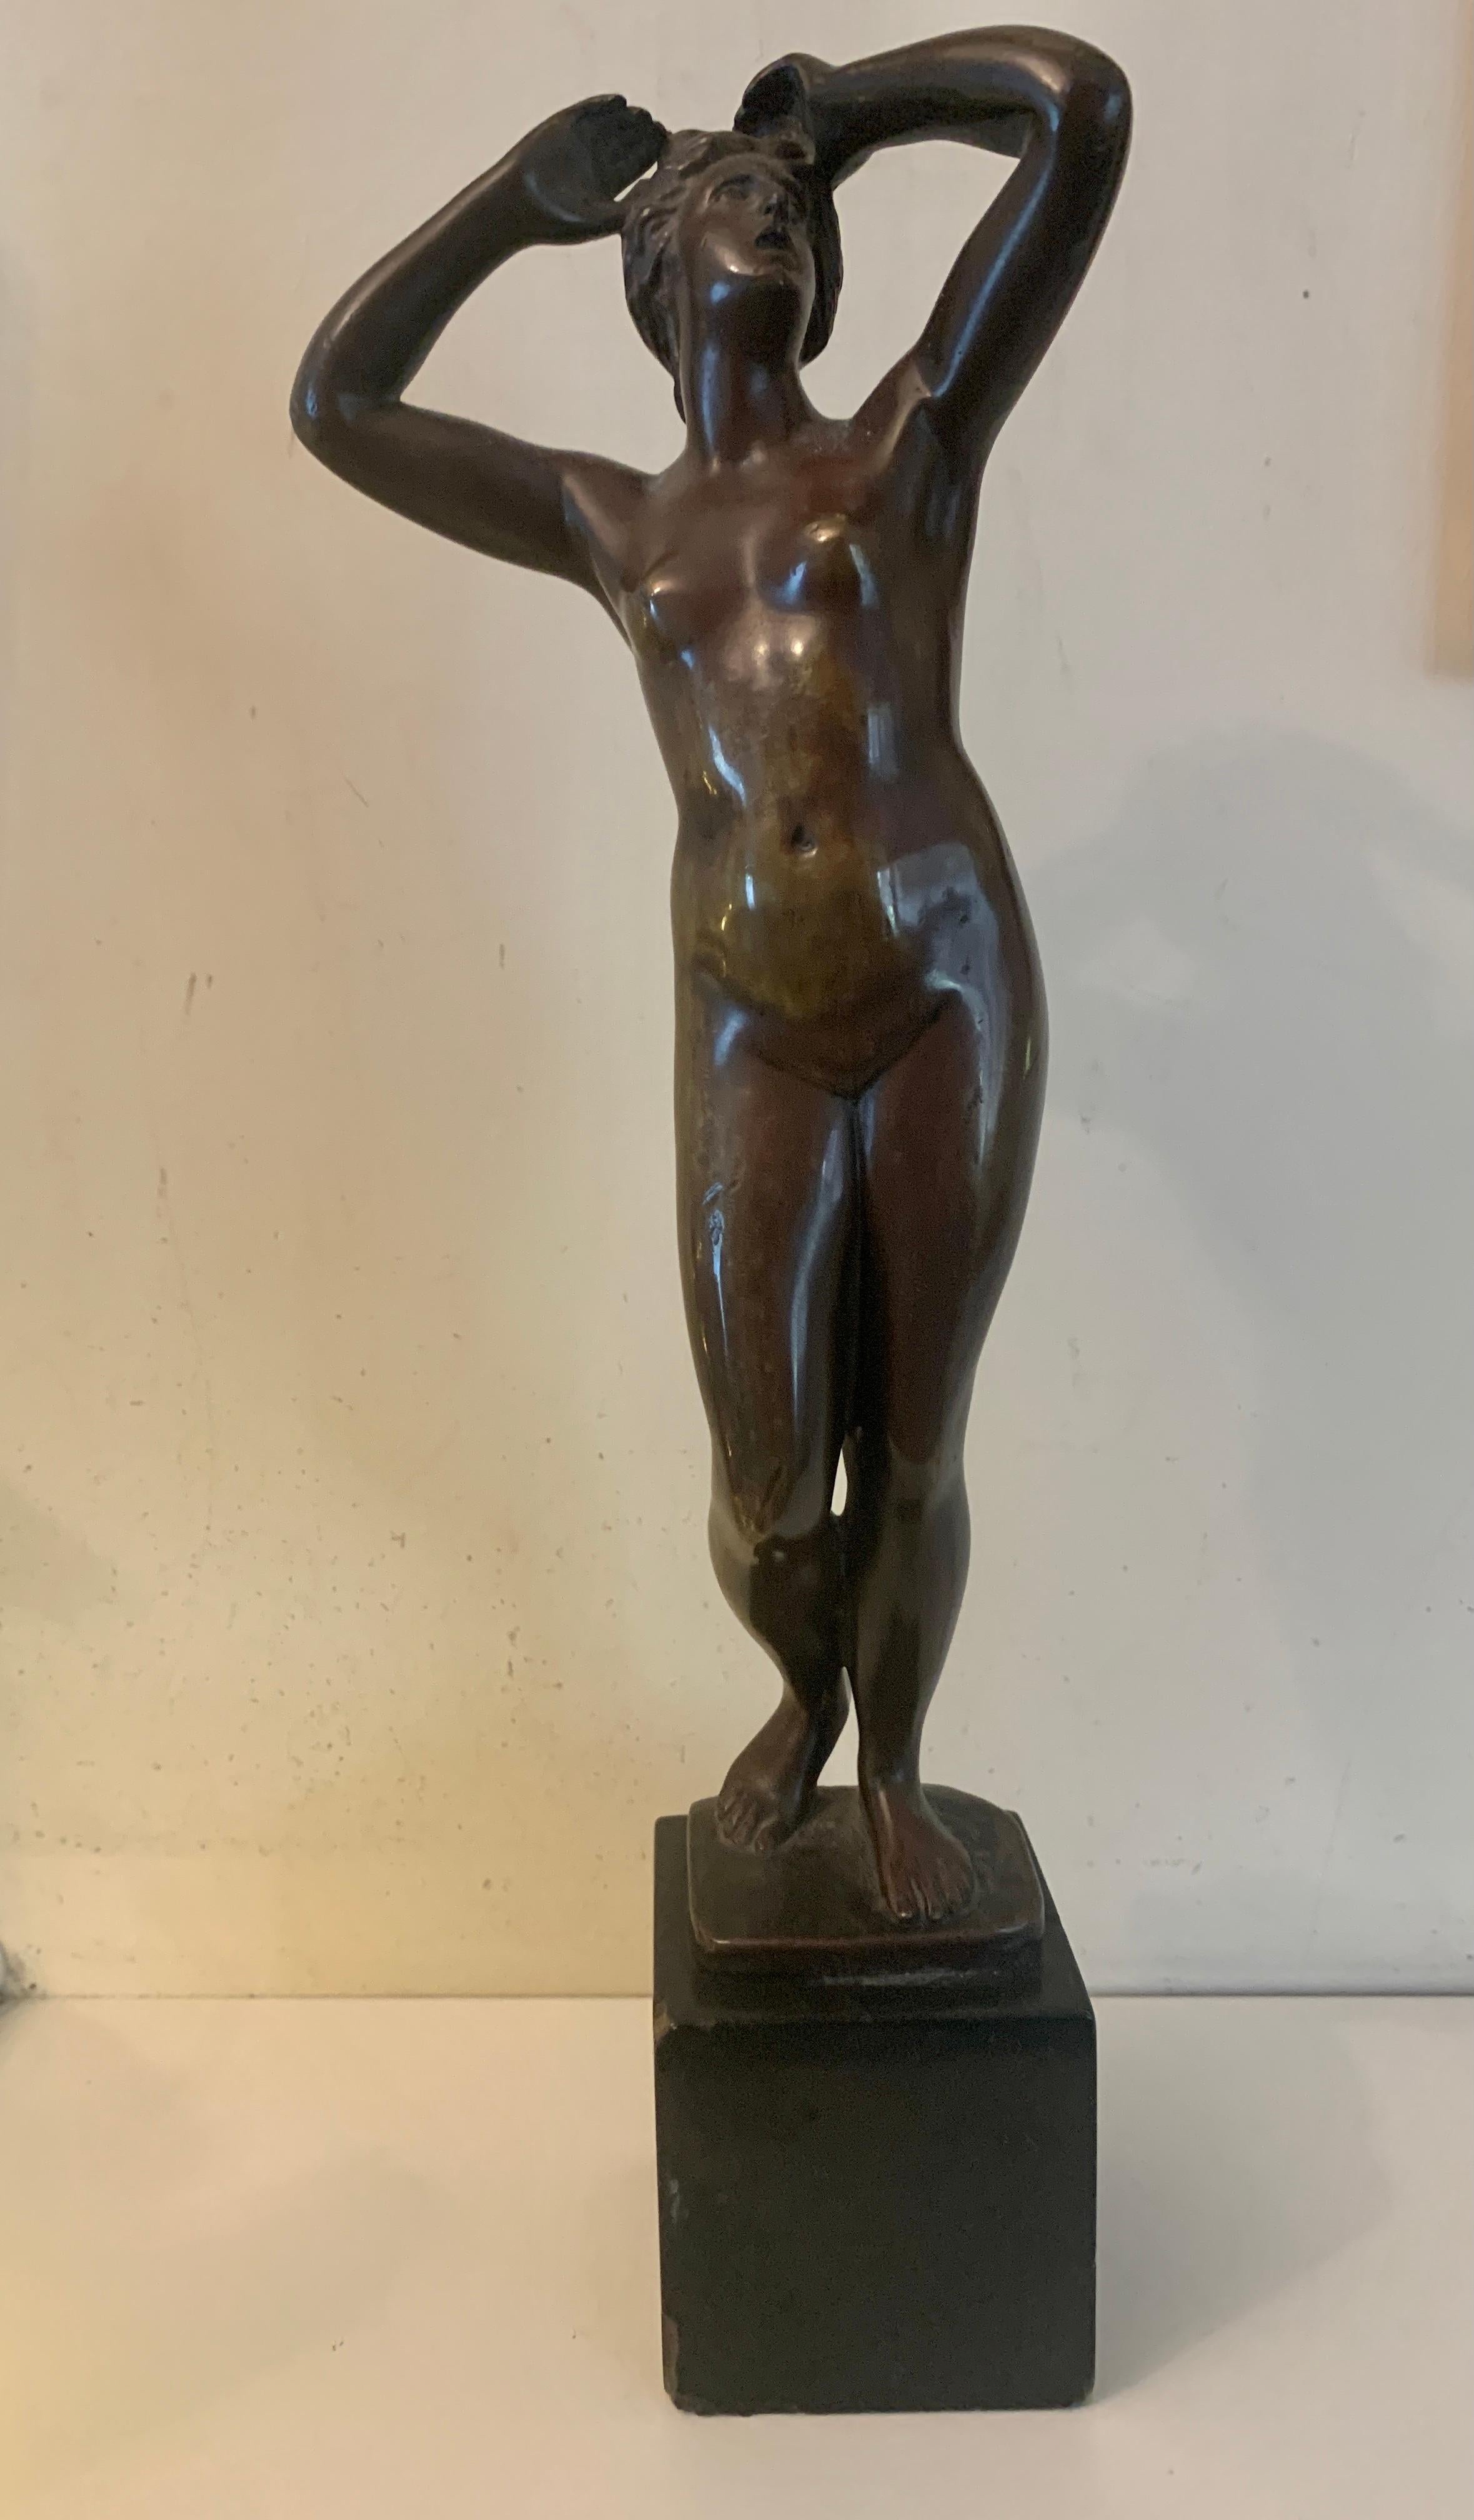 19th century French Bronze of a naked woman standing up.